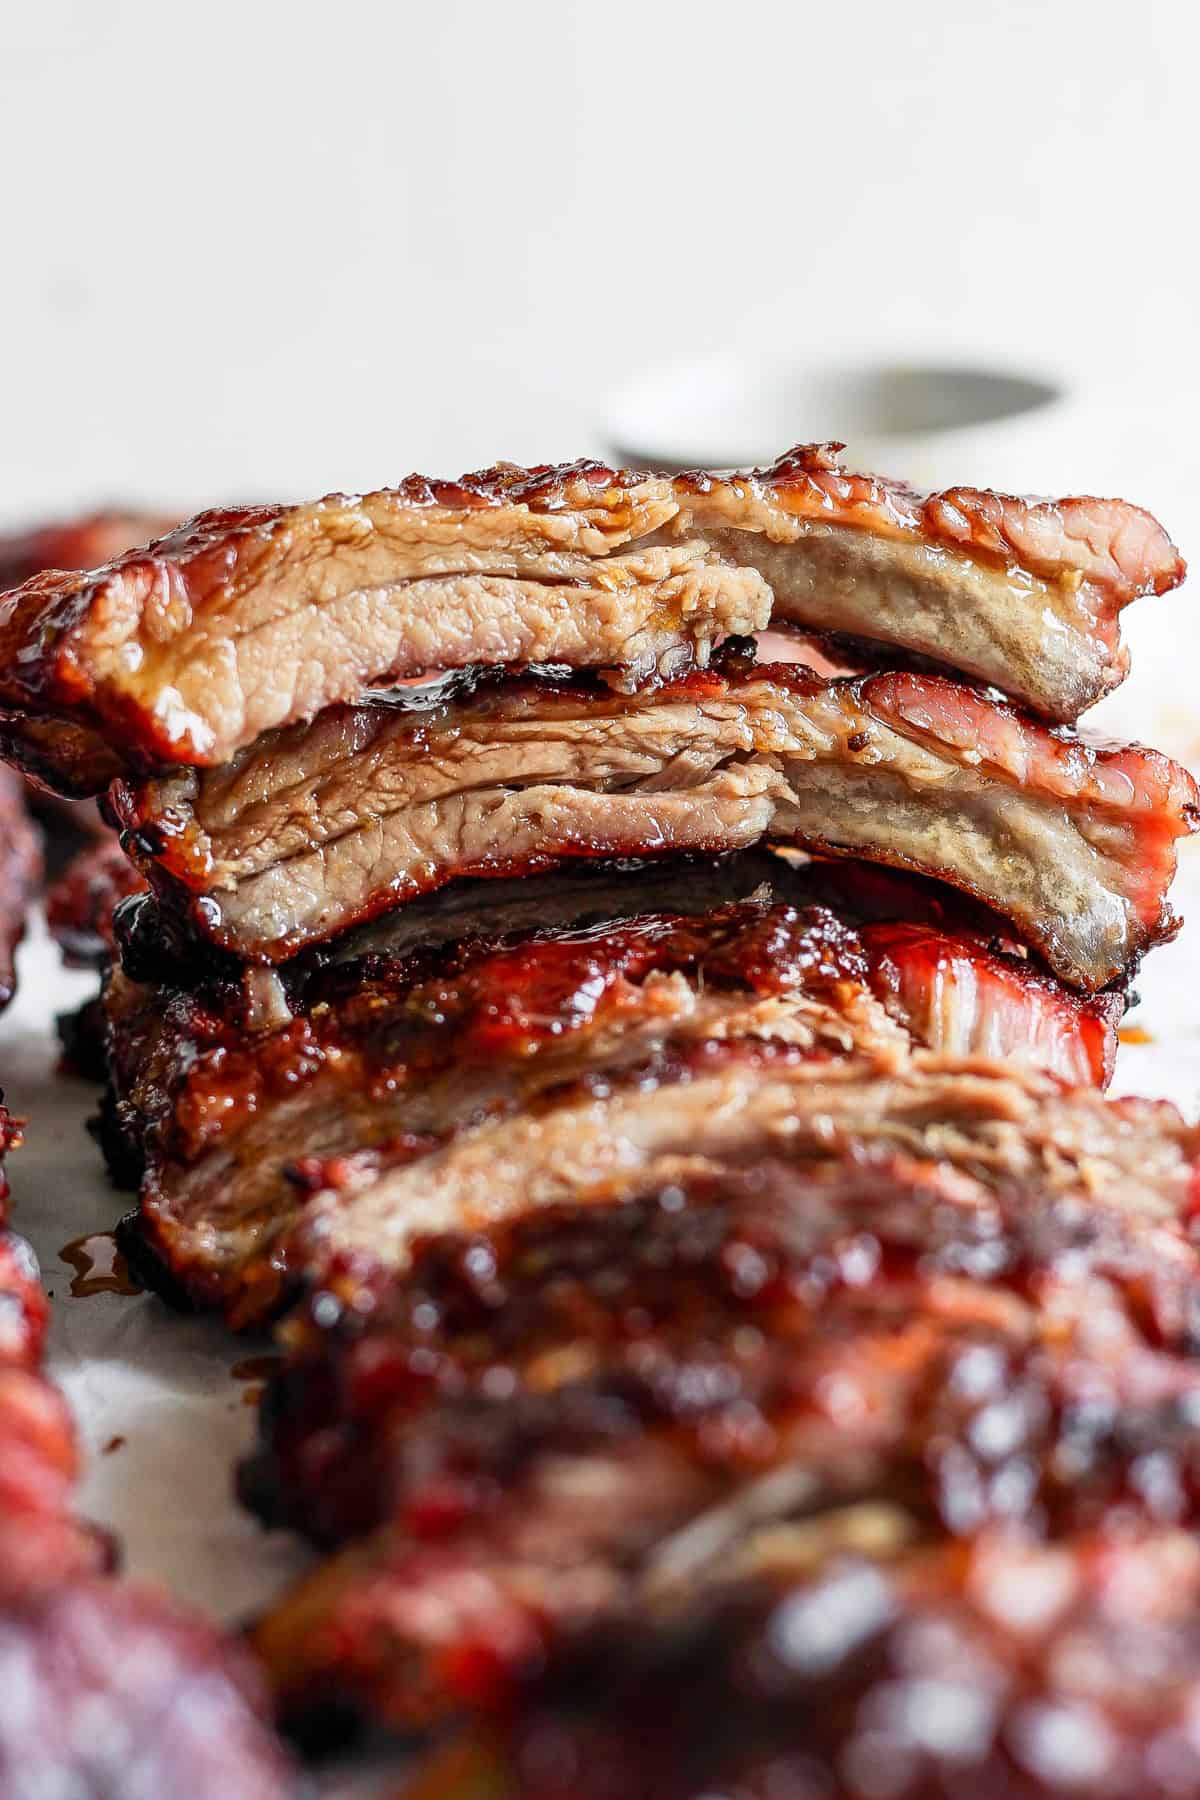 Close-up of a stack of glazed, grilled ribs, with the top piece cut to s،w a juicy, tender interior. The meat is richly caramelized with a glossy, charred exterior.